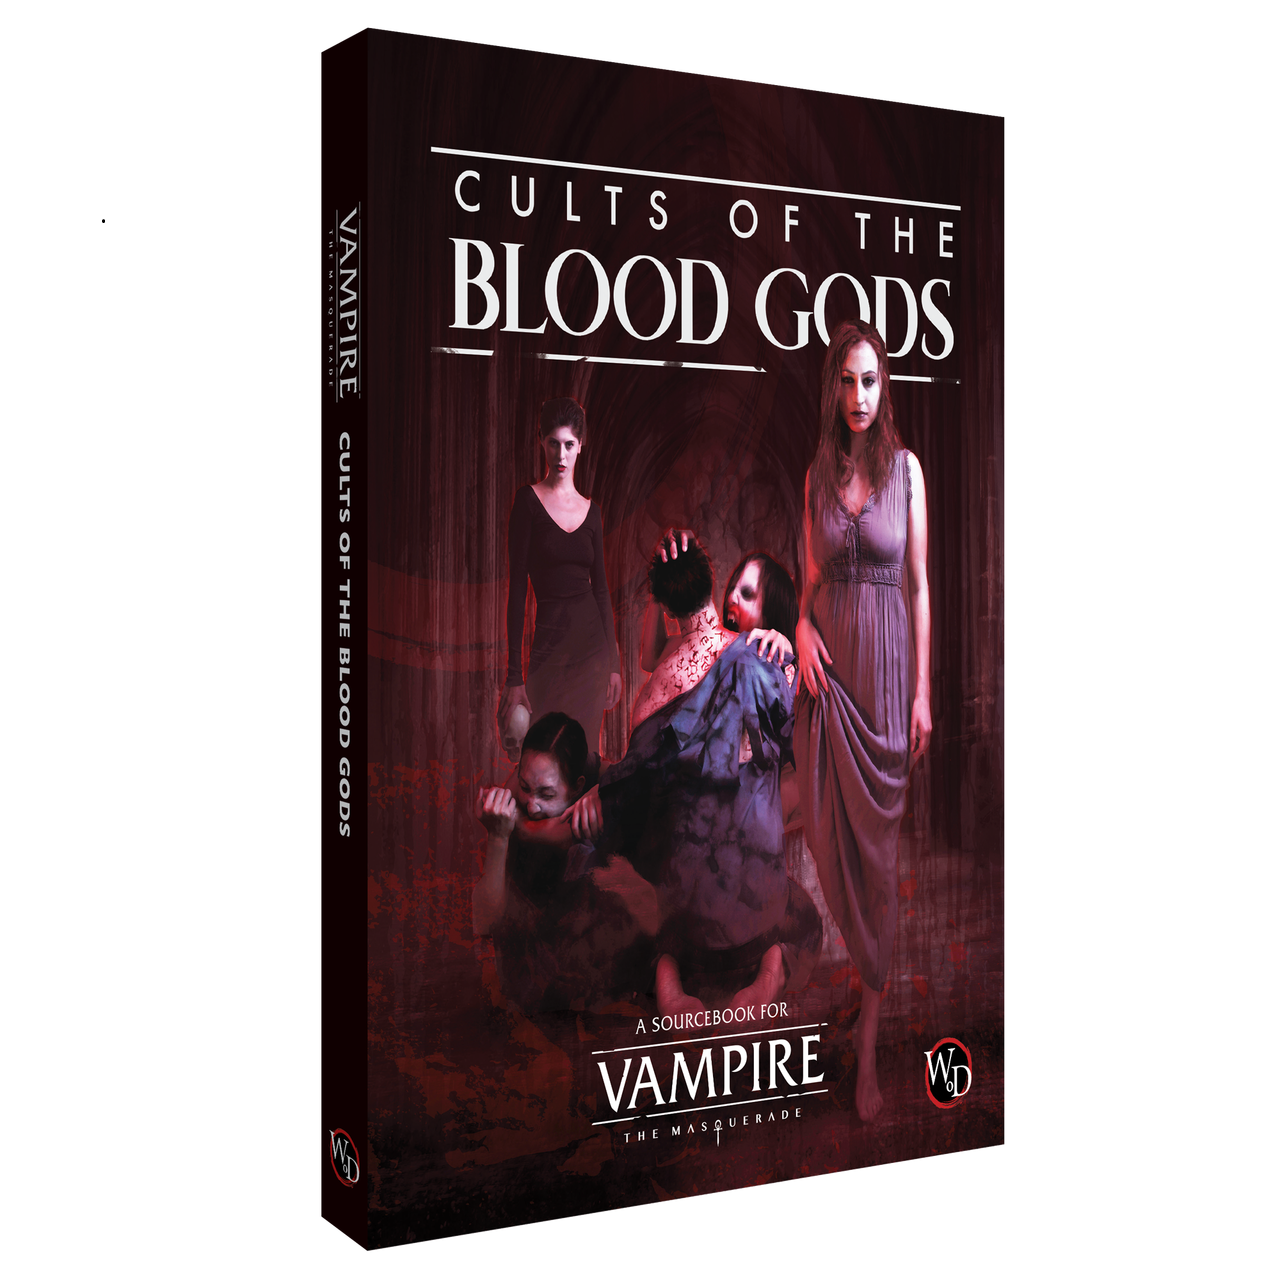 Vampire The Masquerade: Cults of The Blood Gods